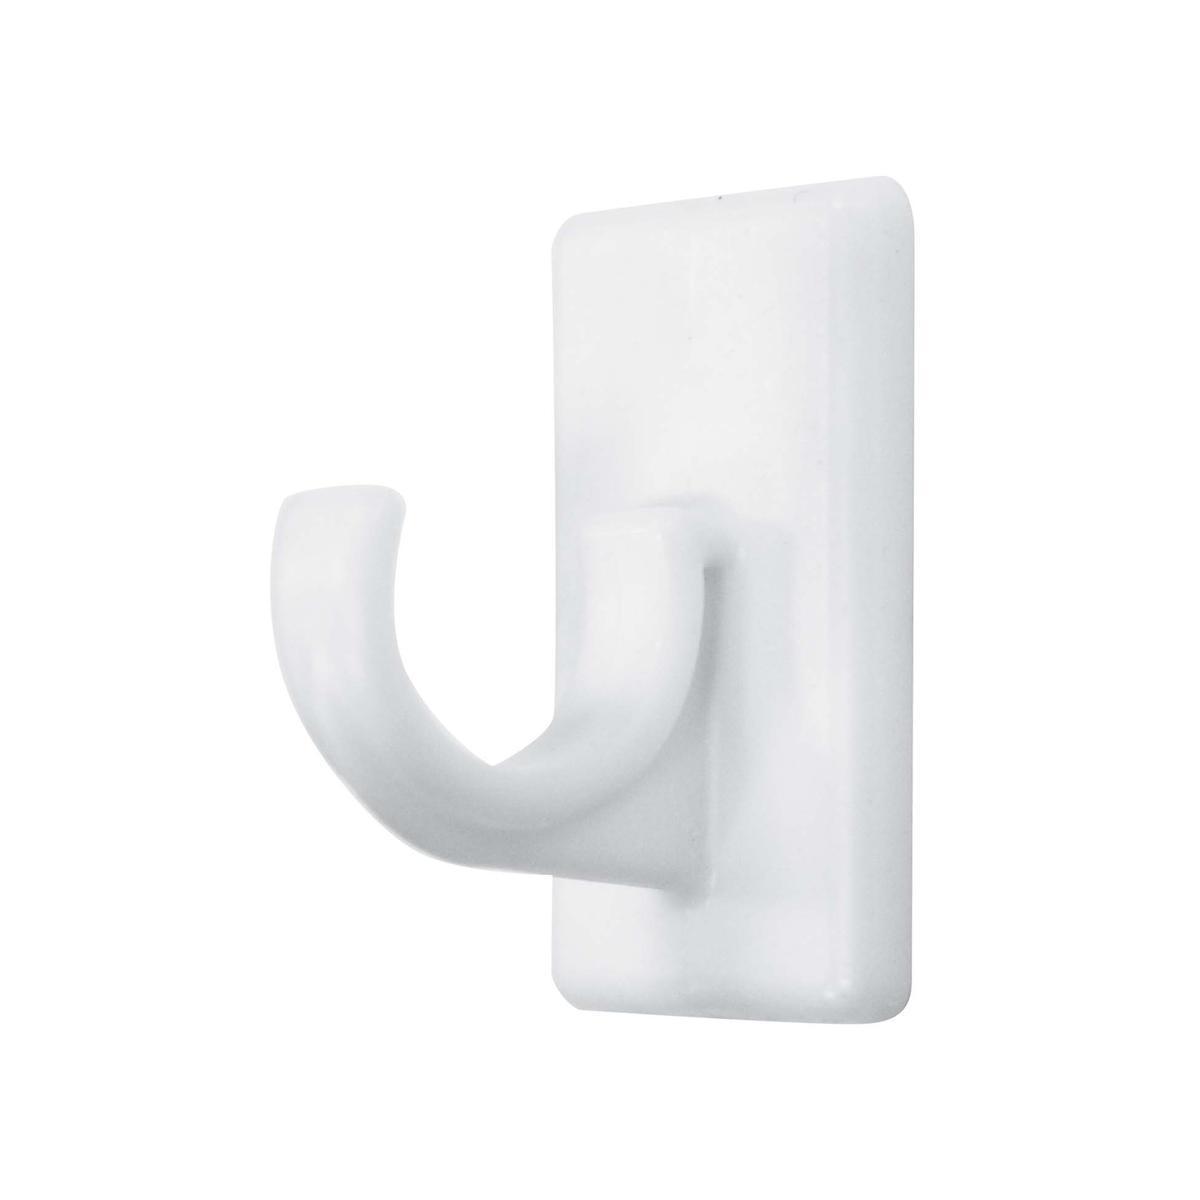 2 supports bistrot courts - L 3 x H 2 x l 2 cm - Blanc